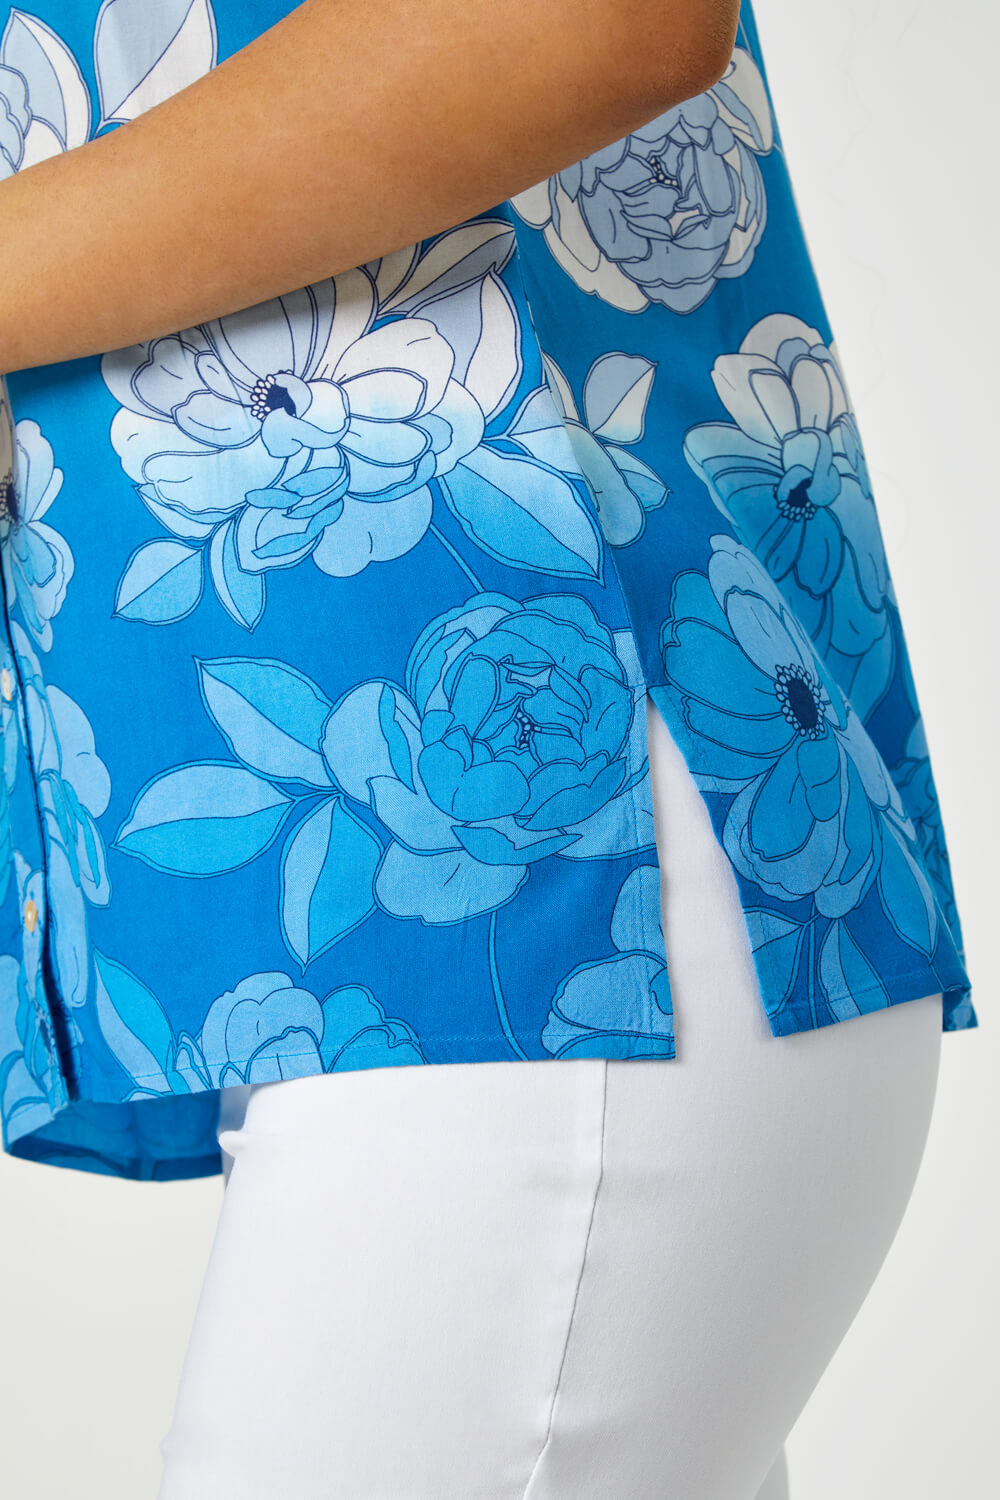 Blue Sleeveless Floral Print Blouse, Image 5 of 5